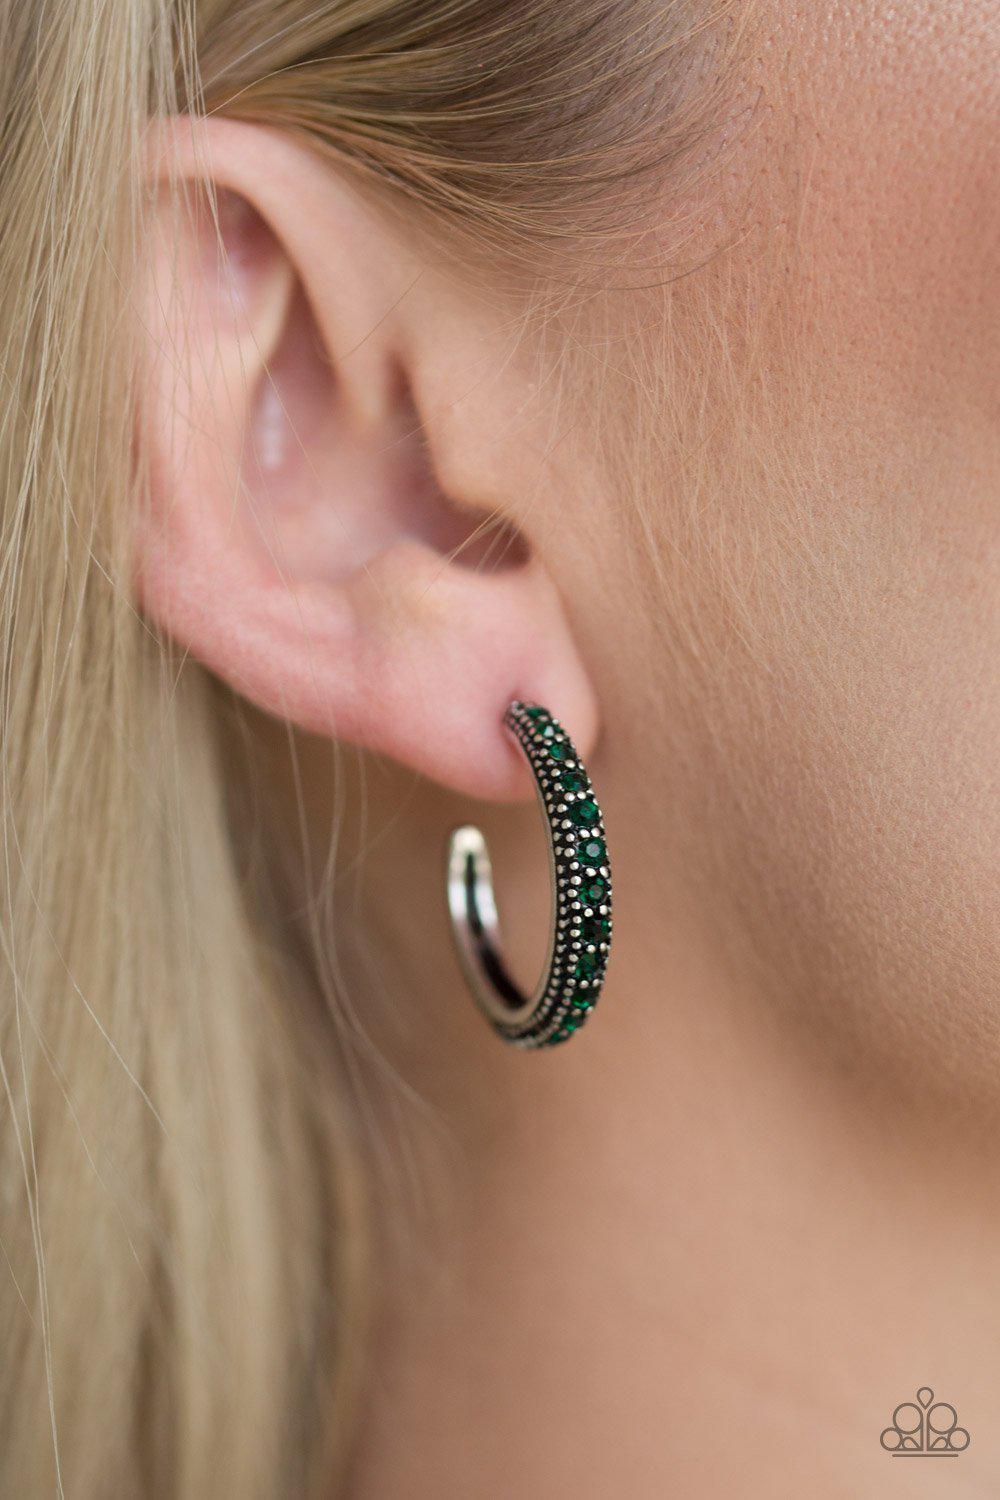 Twinkling Tinseltown Emerald Green Hoop Earrings - Paparazzi Accessories-CarasShop.com - $5 Jewelry by Cara Jewels